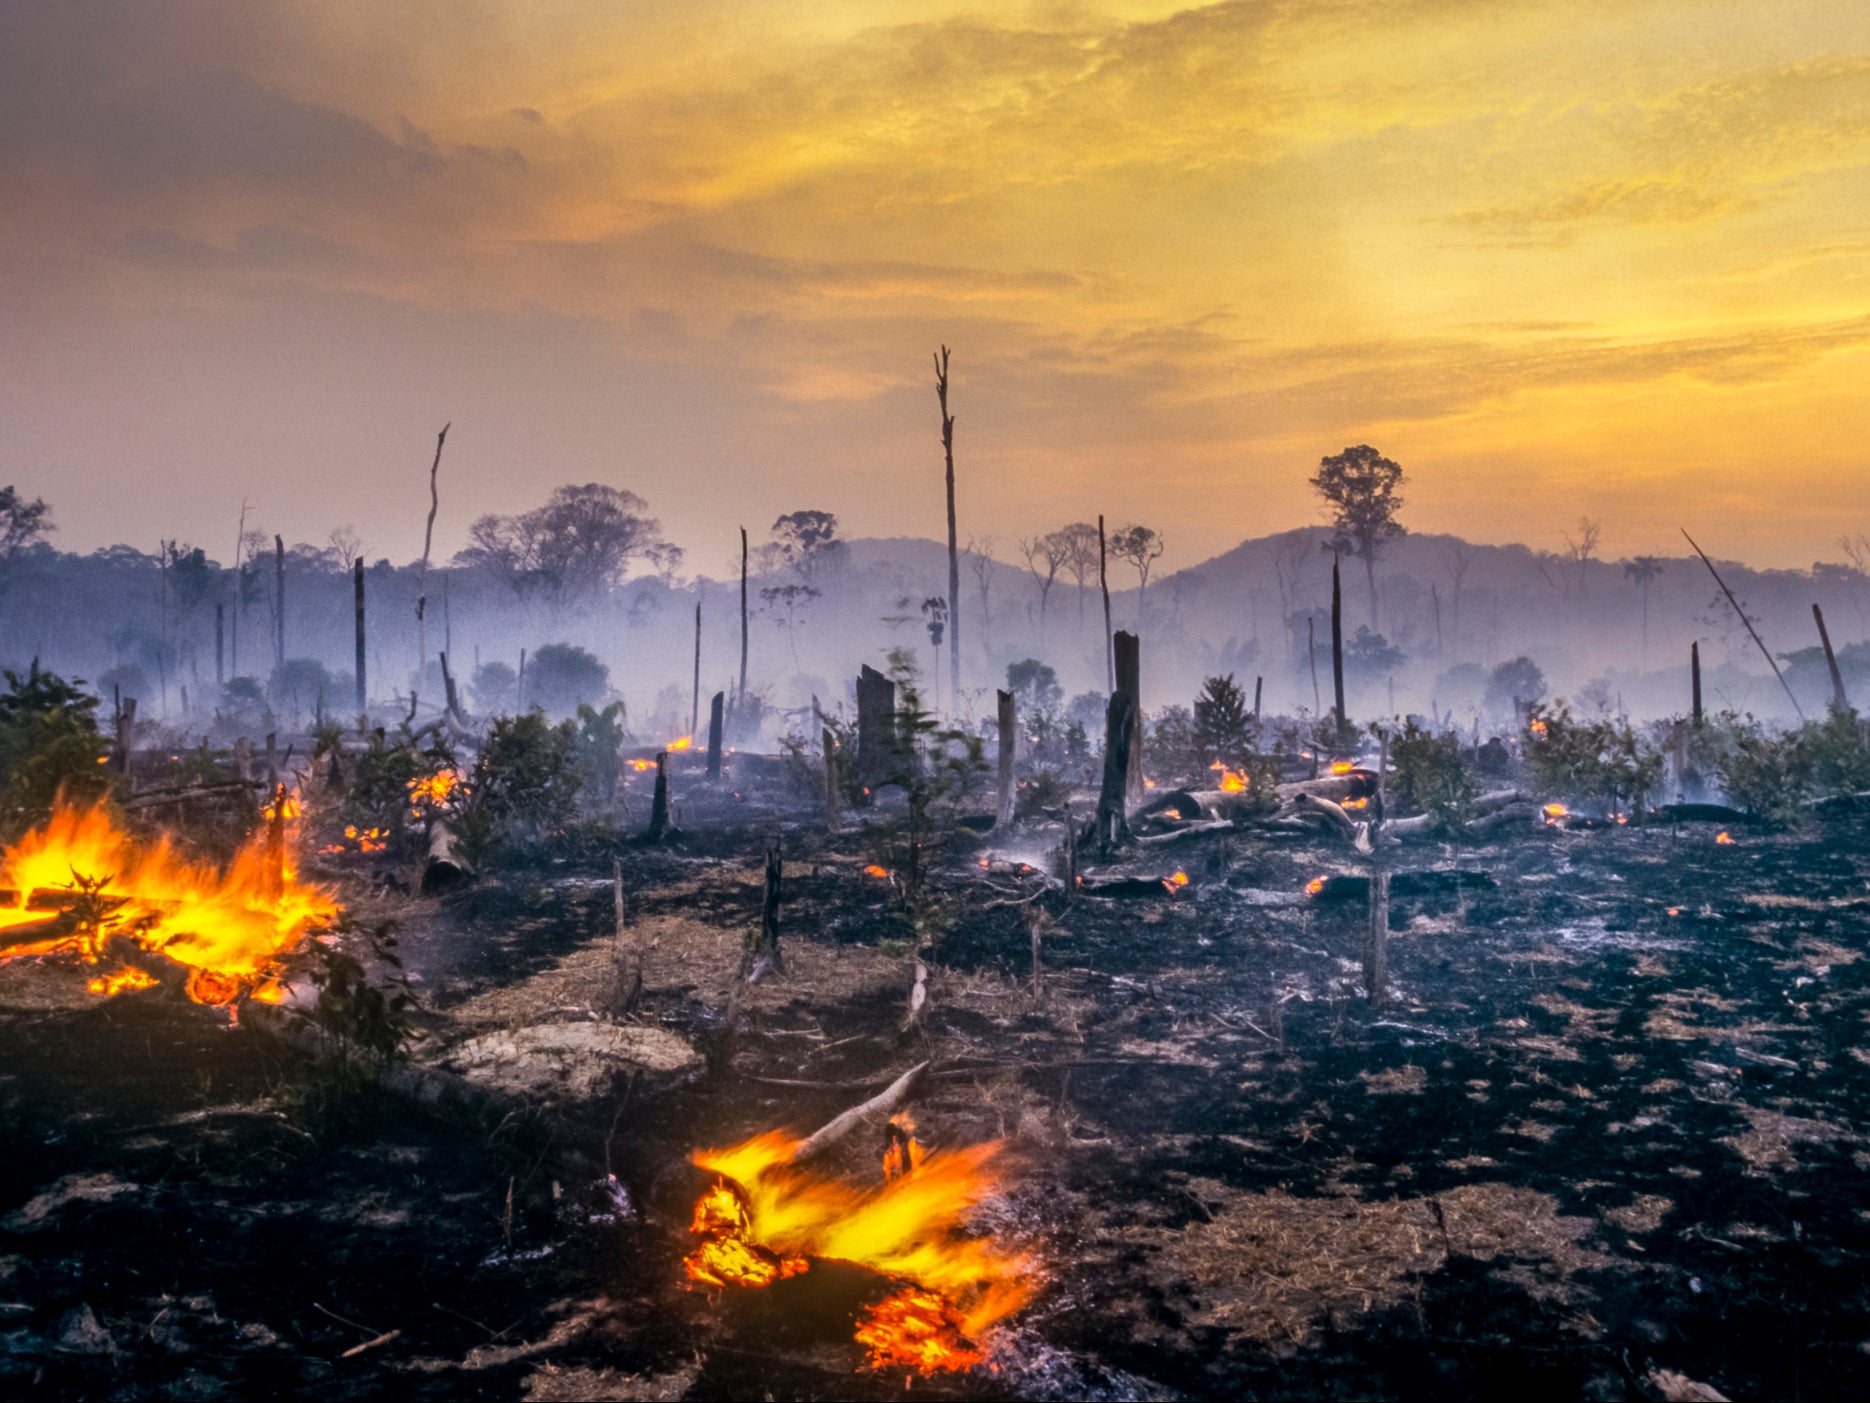 Humanity is ‘pushing the world’s largest rainforest alarmingly close to a precipice'